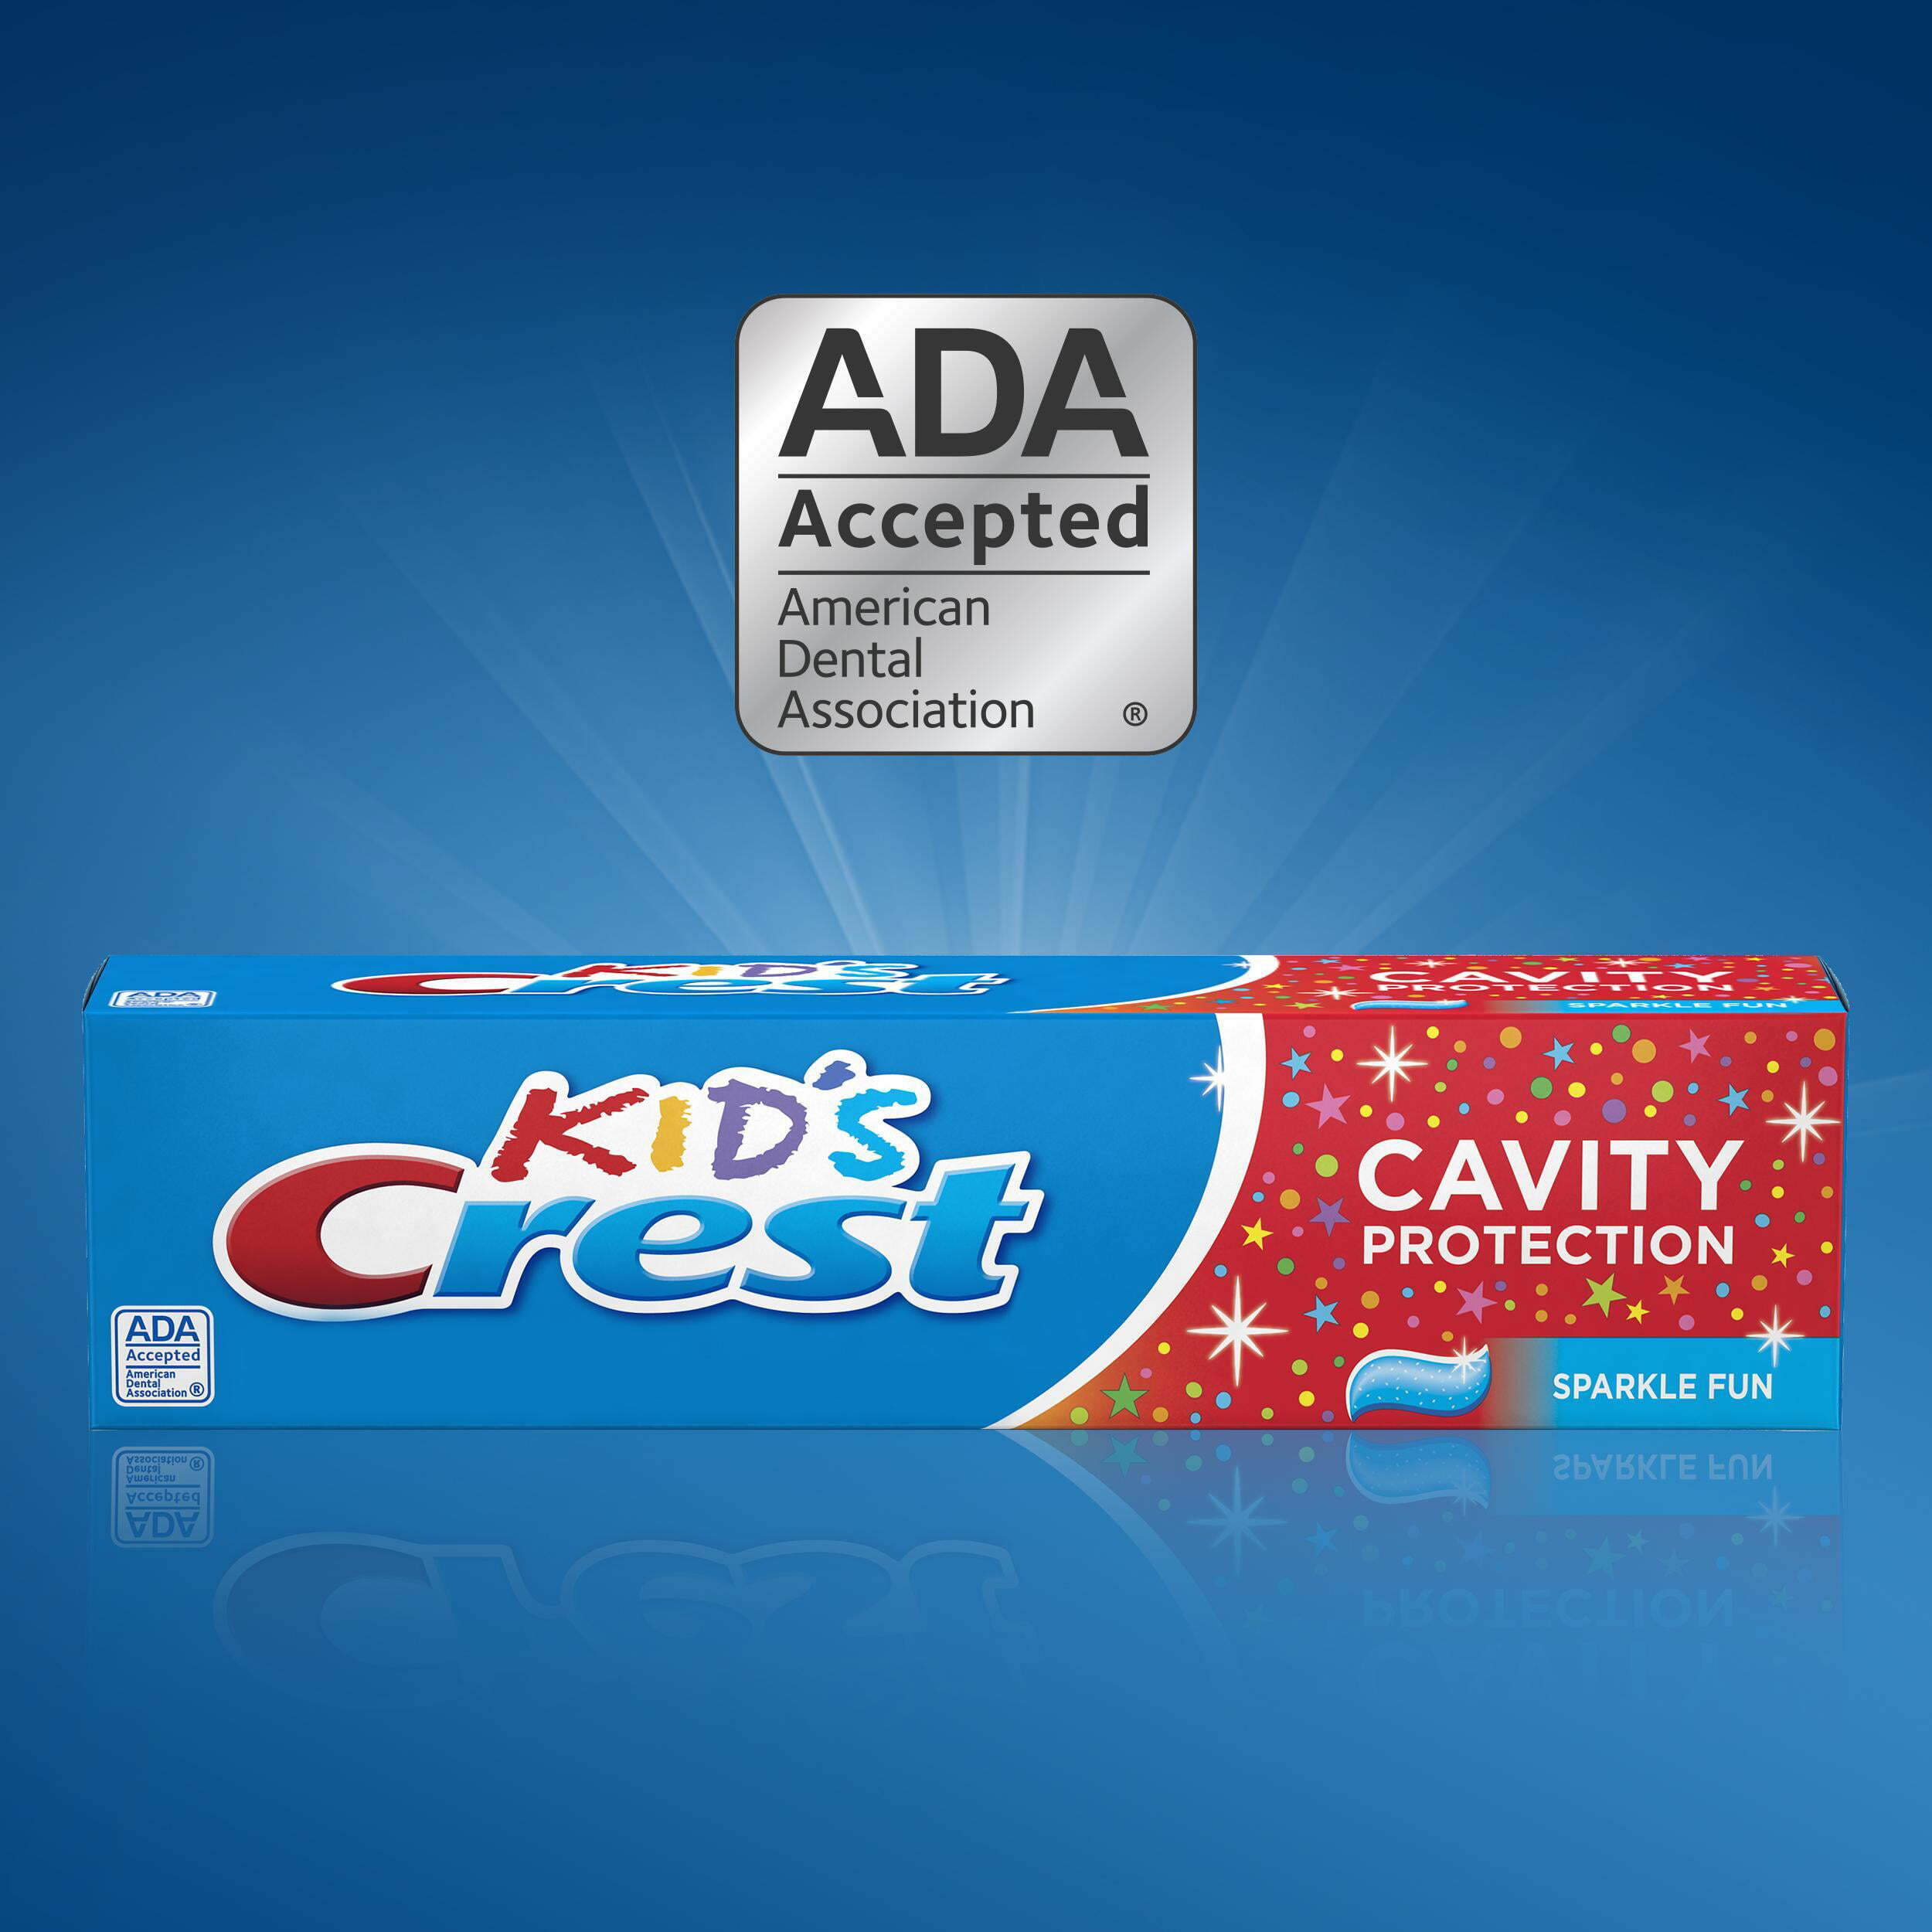 Crest Kids Cavity Protection Toothpaste, Sparkle Fun Flavor, 4.6 oz 3 Pack - image 4 of 8